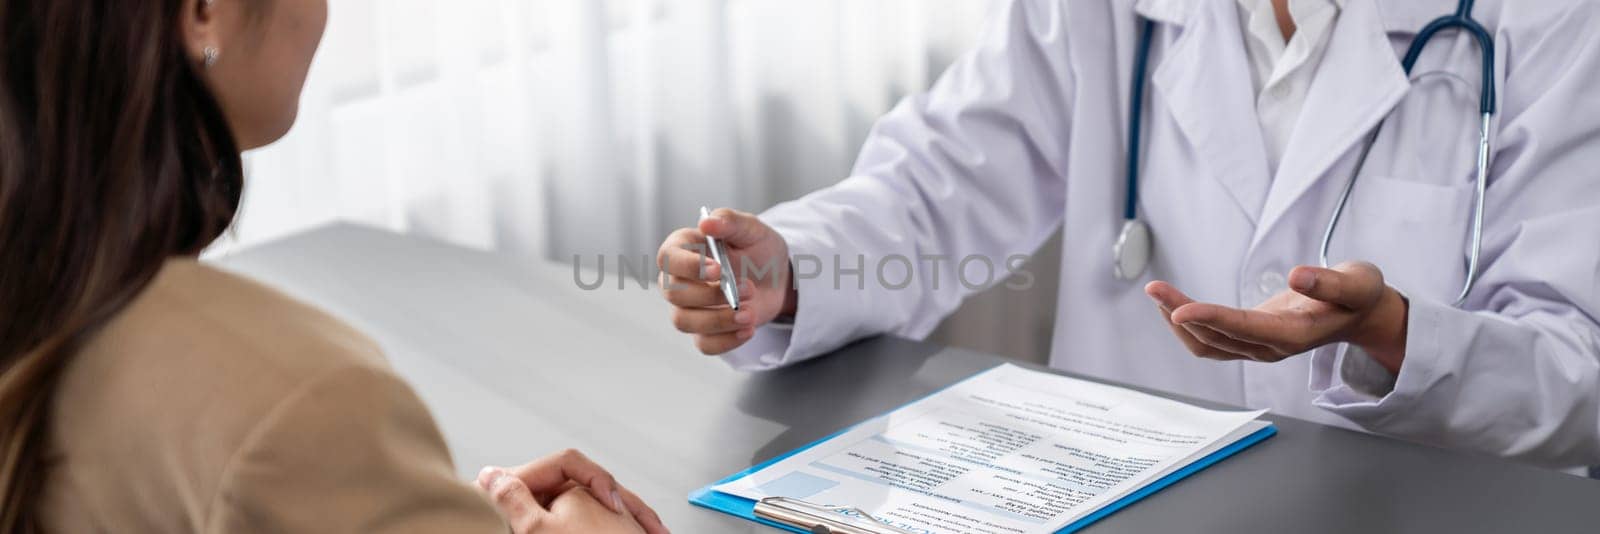 Doctor show medical diagnosis report and providing compassionate healthcare consultation to young patient in doctor clinic office. Doctor appointment and medical consult concept. Neoteric